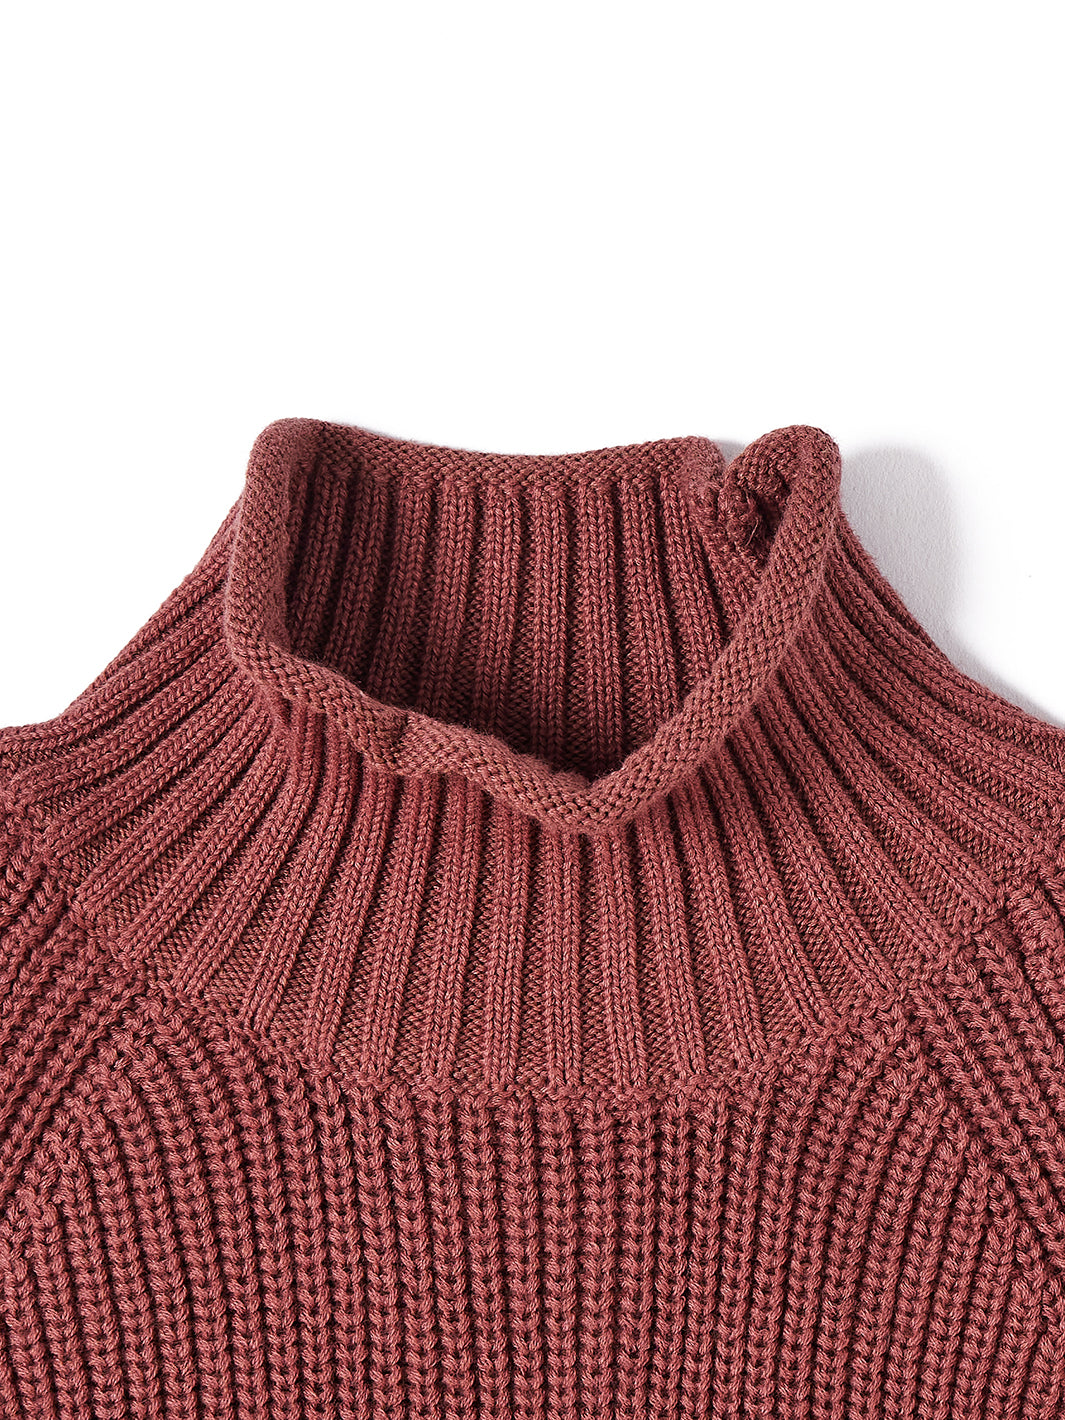 Solid Curled Mock Neck Sweater - Rust Brown